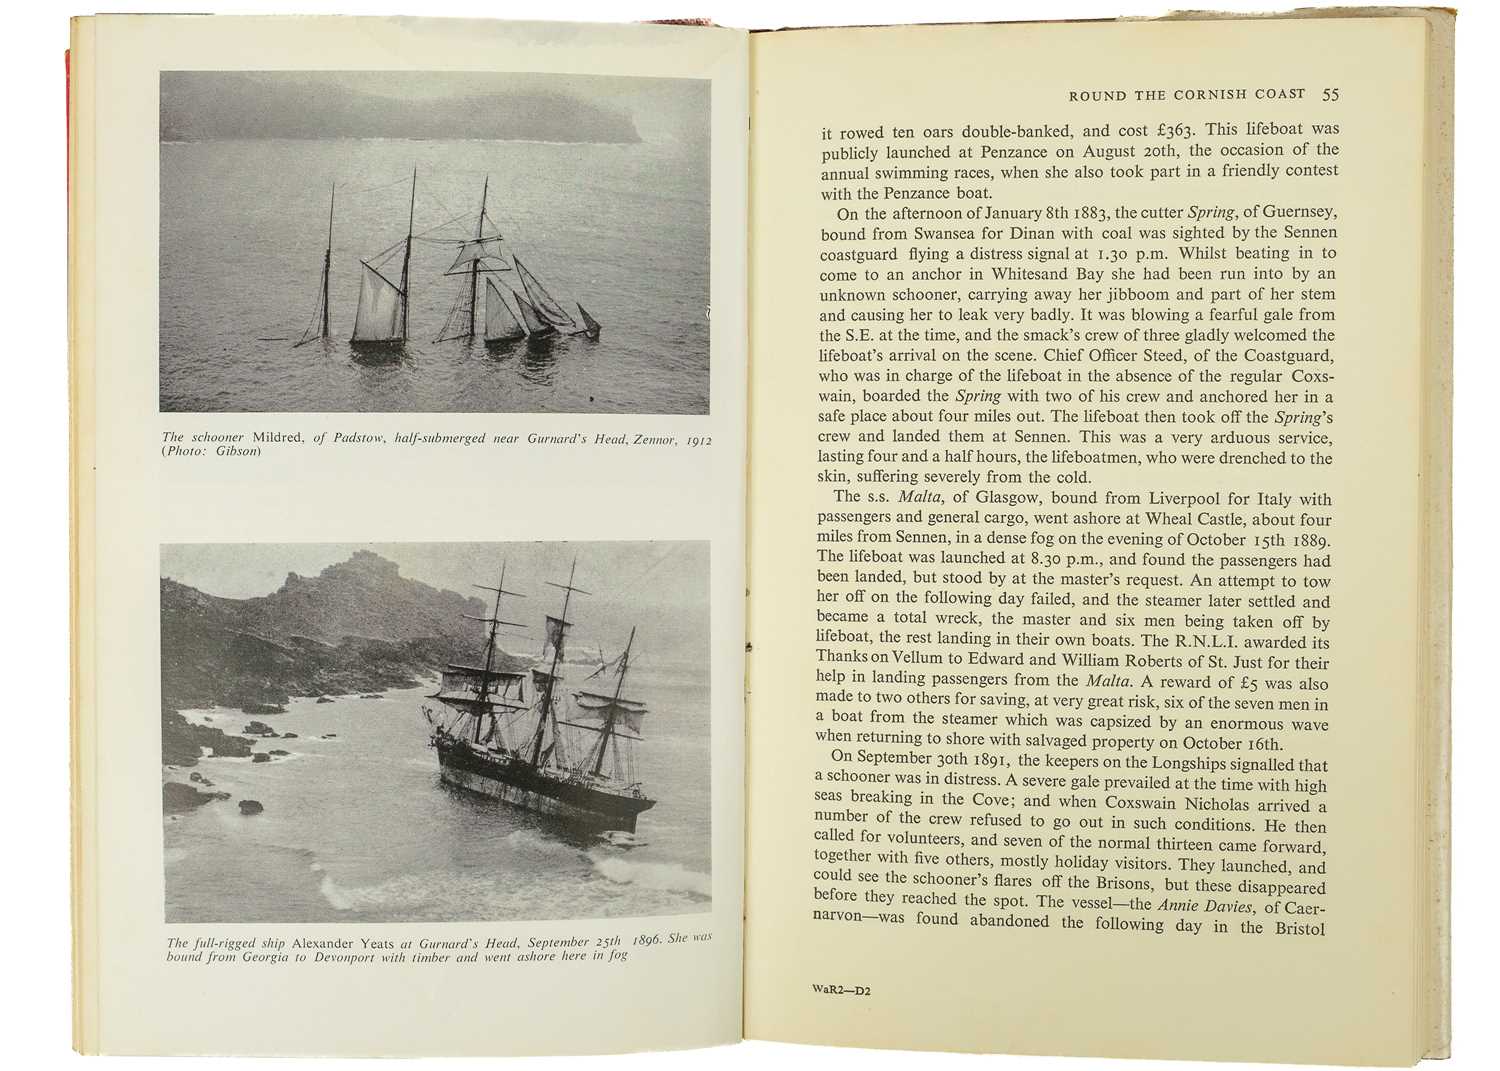 NOALL, Cyril and FARR, Grahame 'Wreck And Rescue Round The Cornish Coast', three book-set - Image 6 of 11